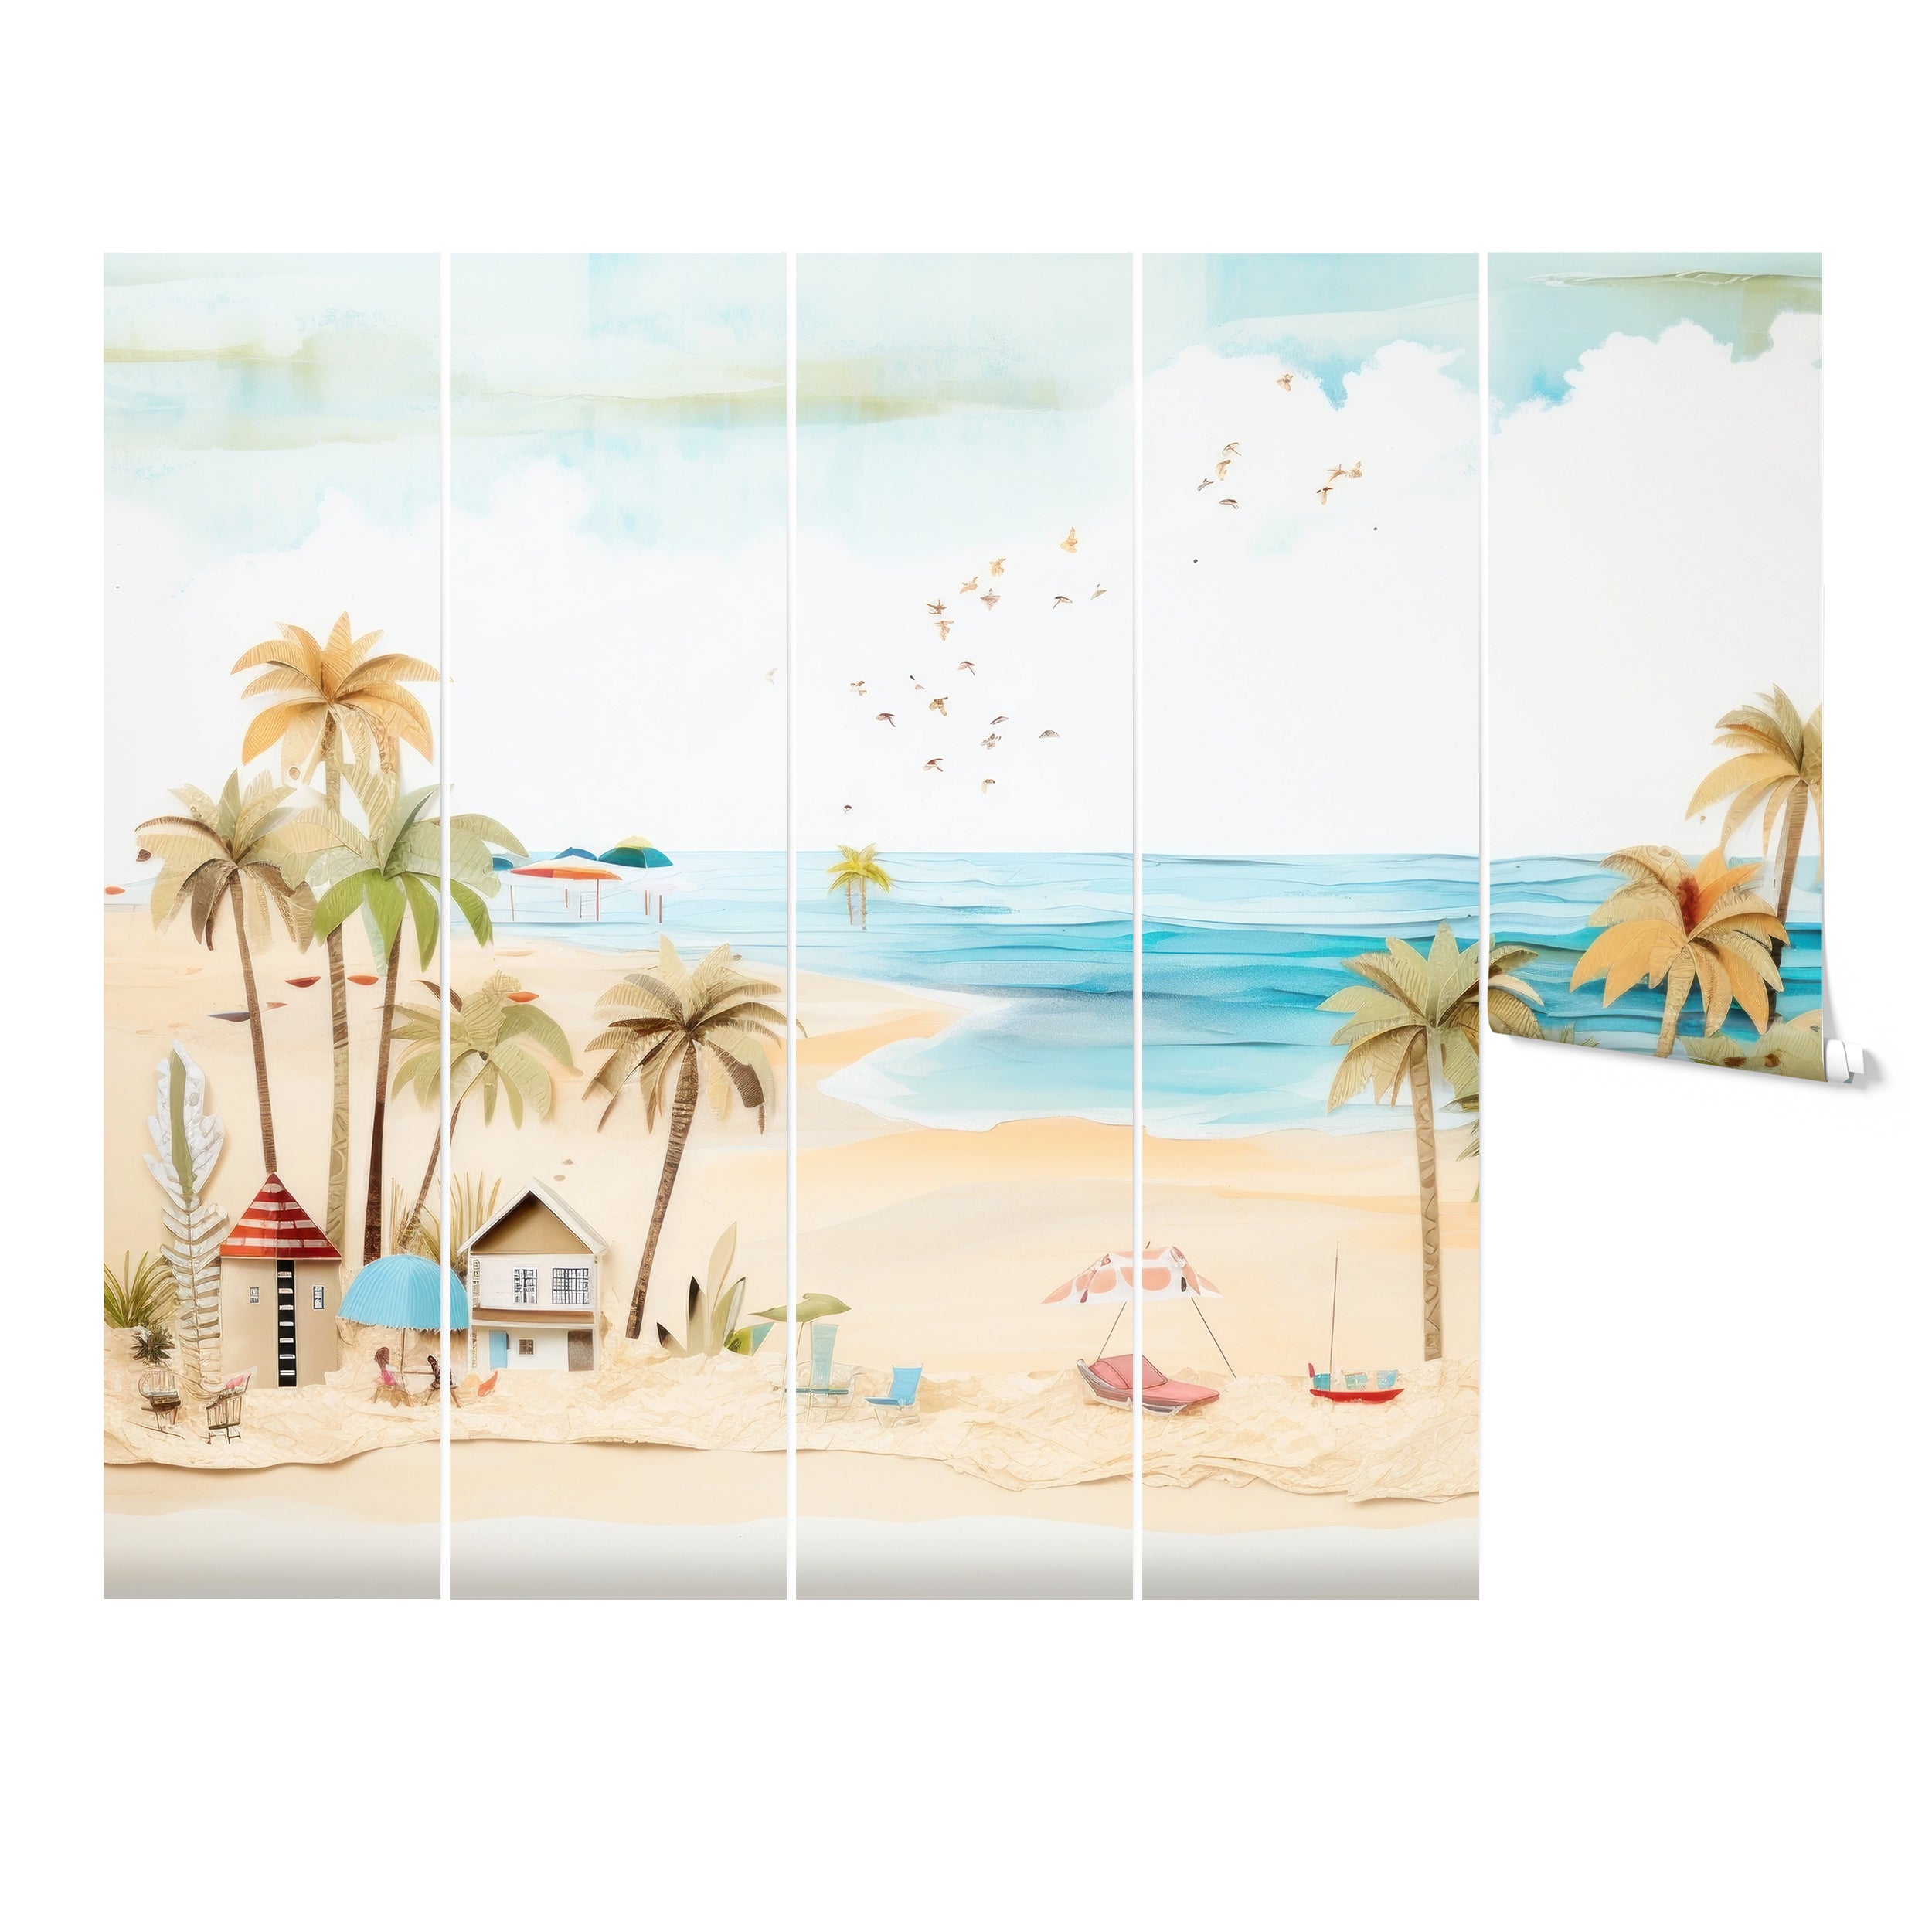 "Island Getaway wallpaper mural depicting a tranquil beach scene with palm trees and sandy shores."